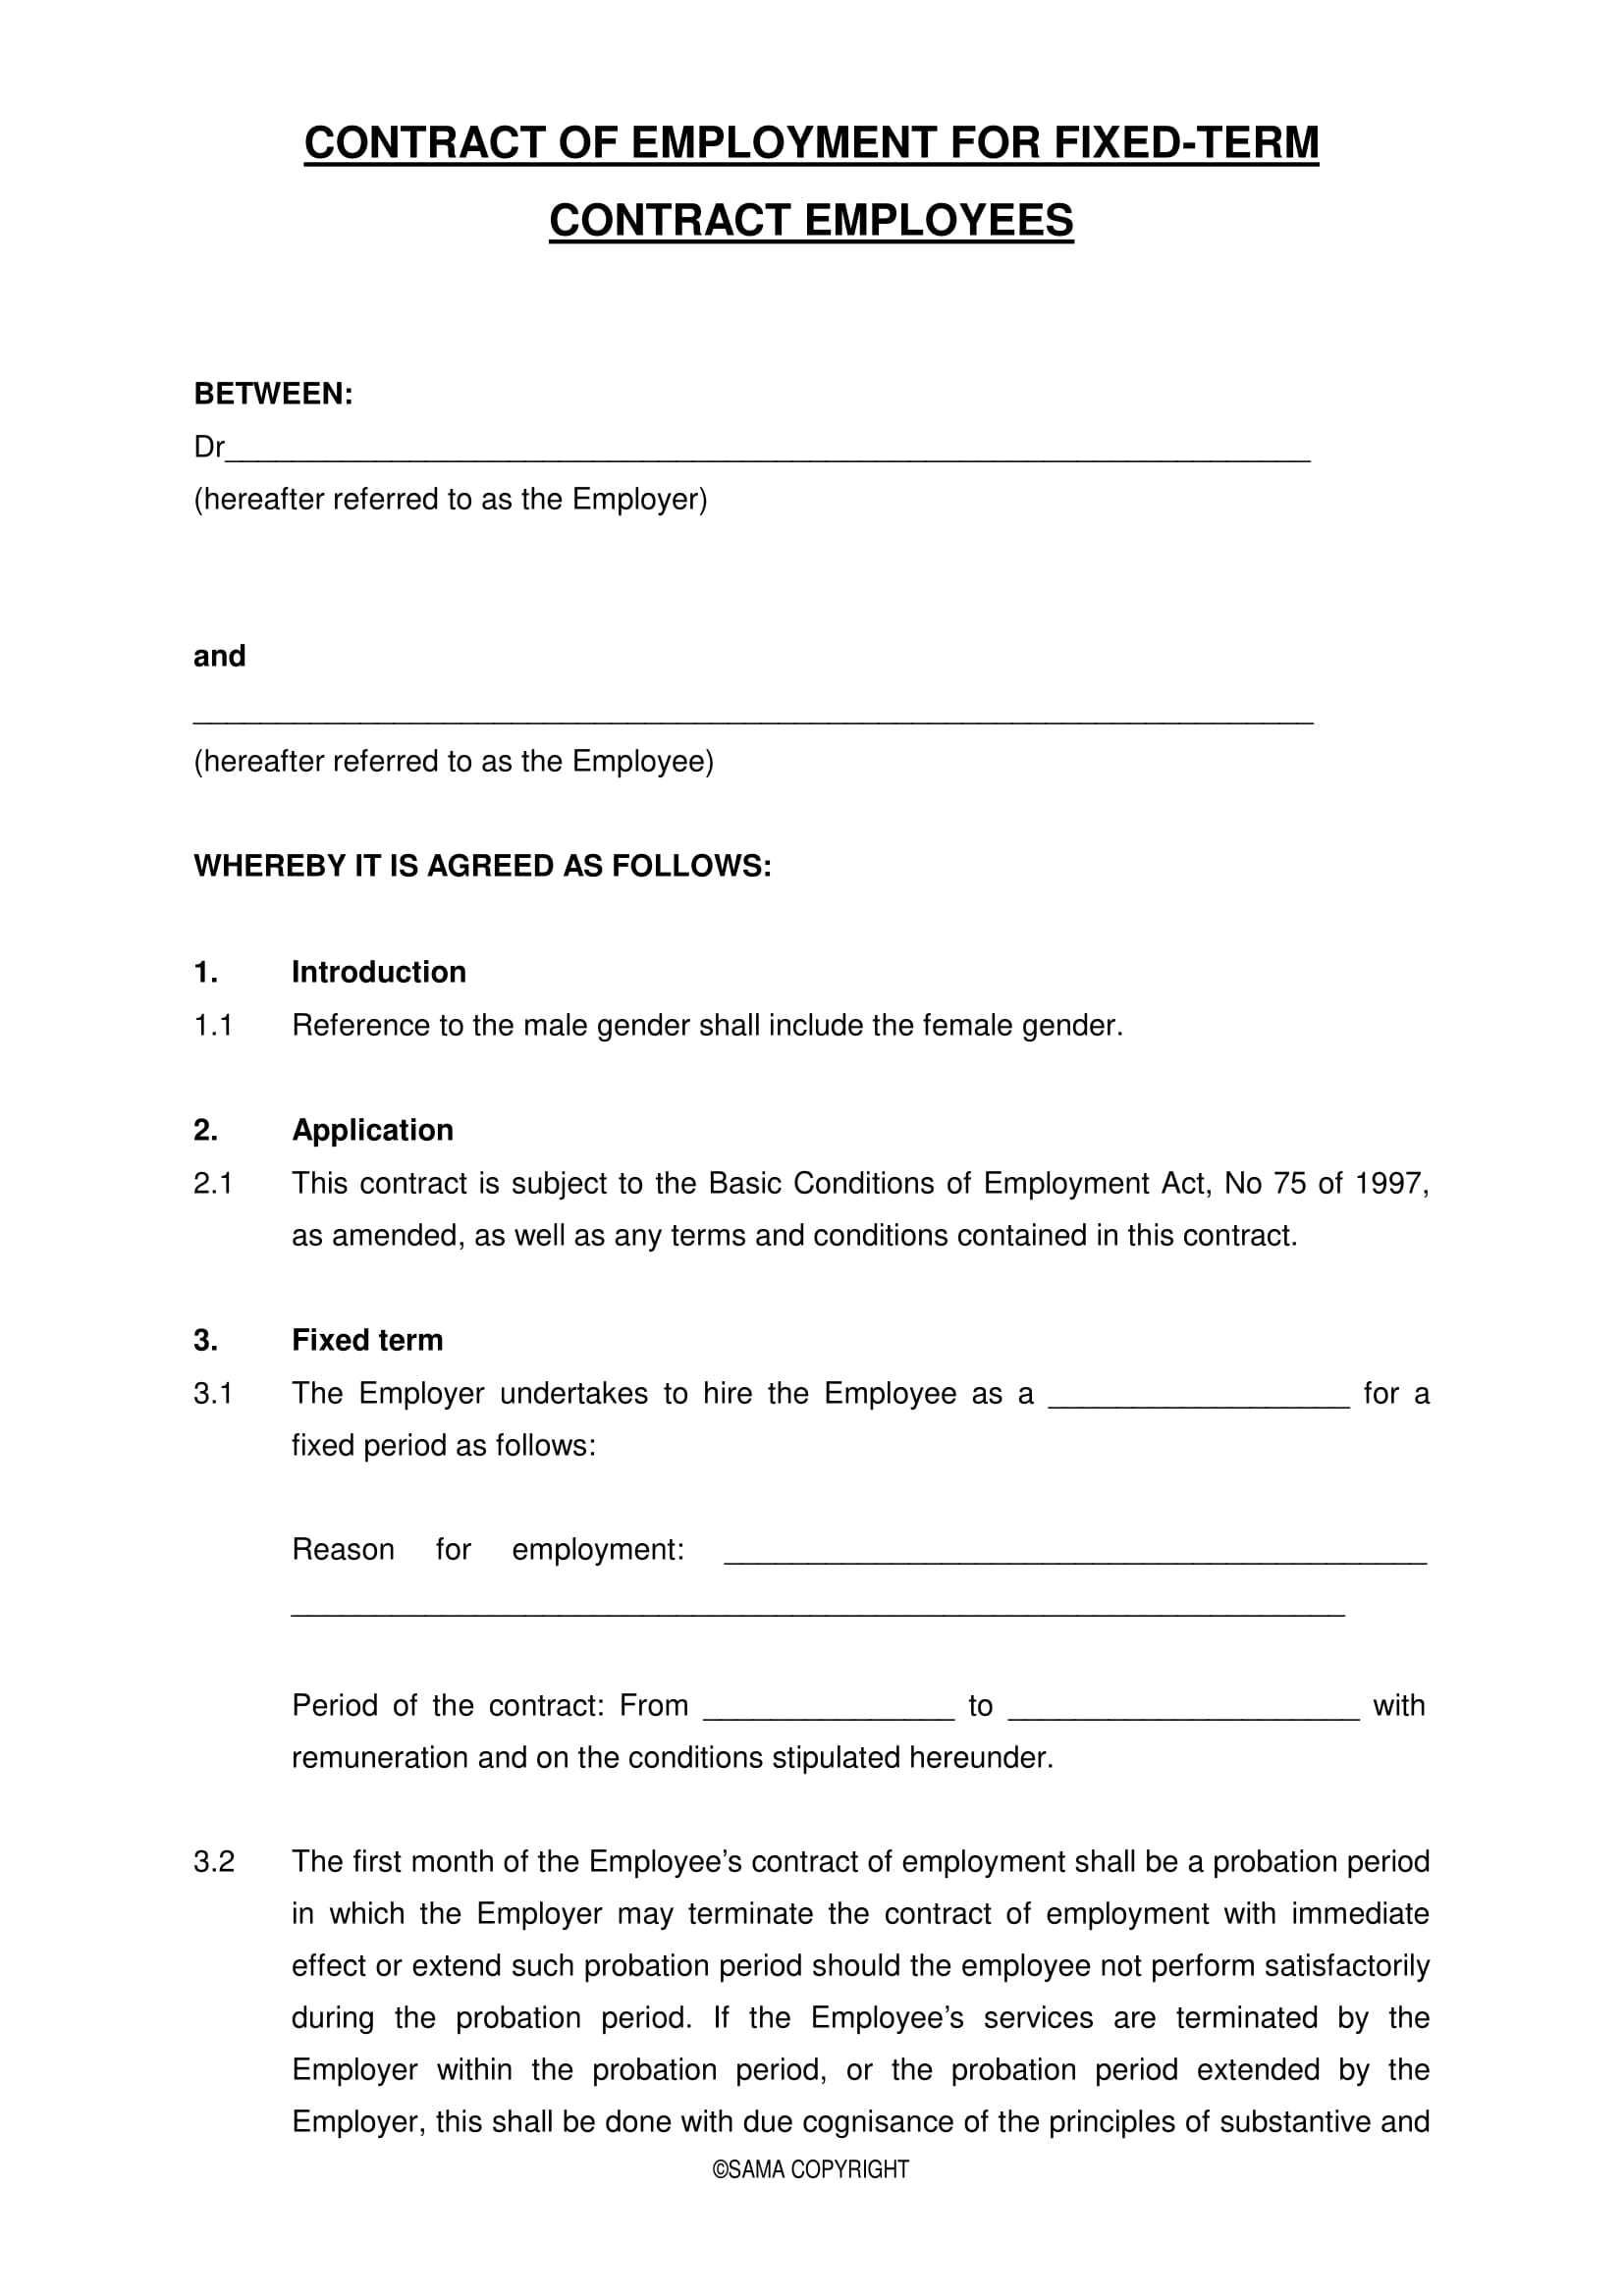 22+ Examples of Employment Contract Templates - Word, Apple Pages